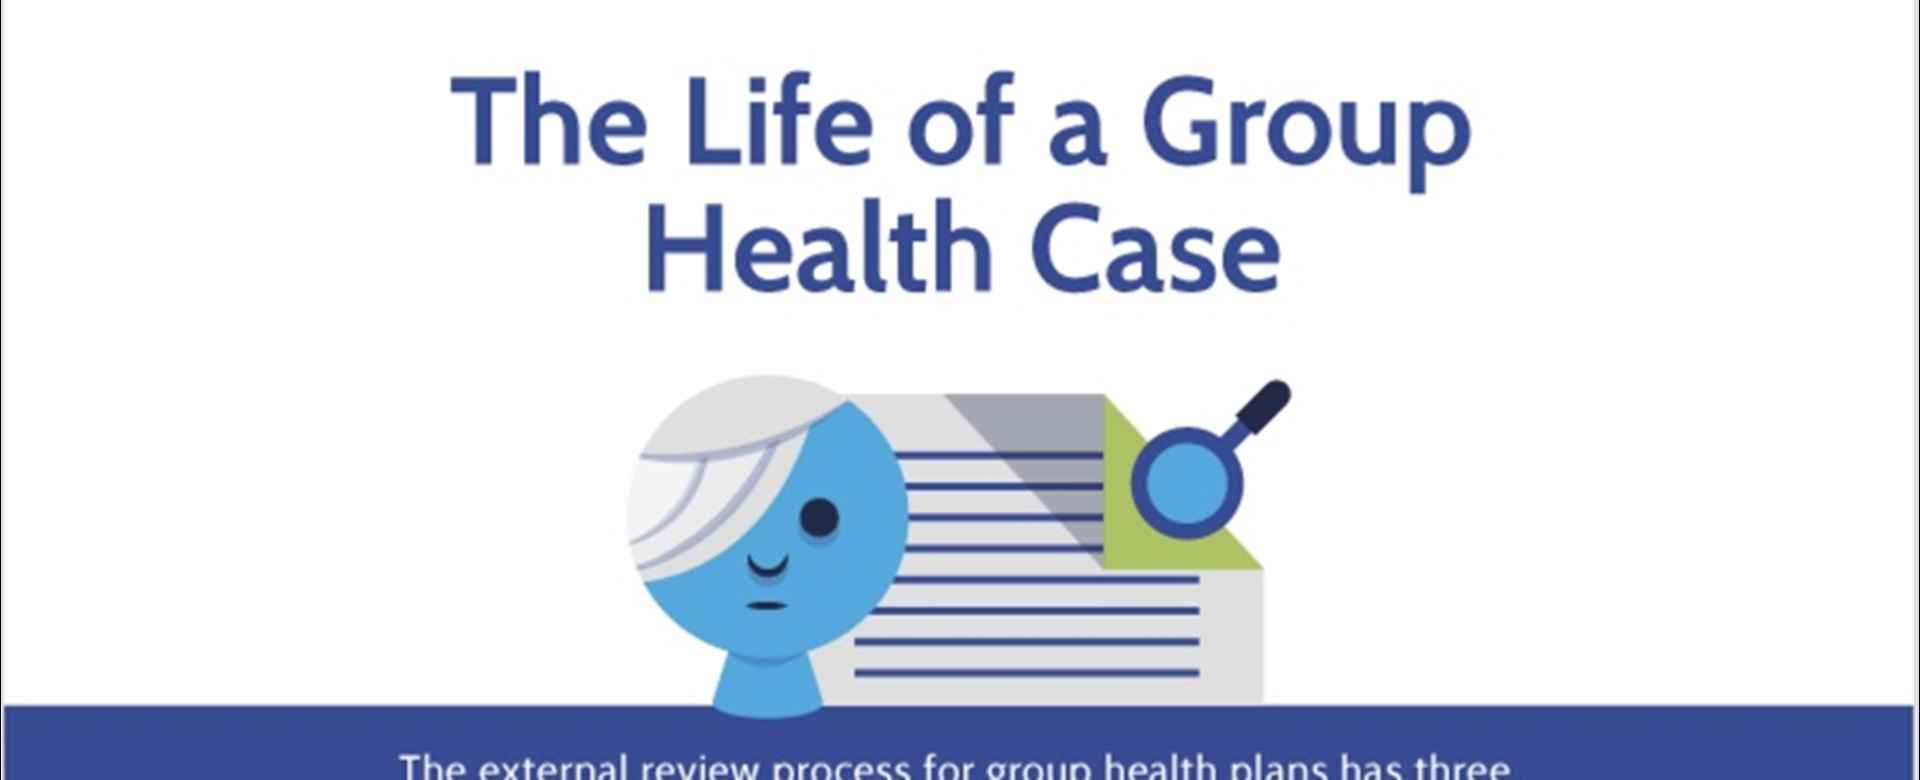 The Life of a Group Health Case [Infographic]